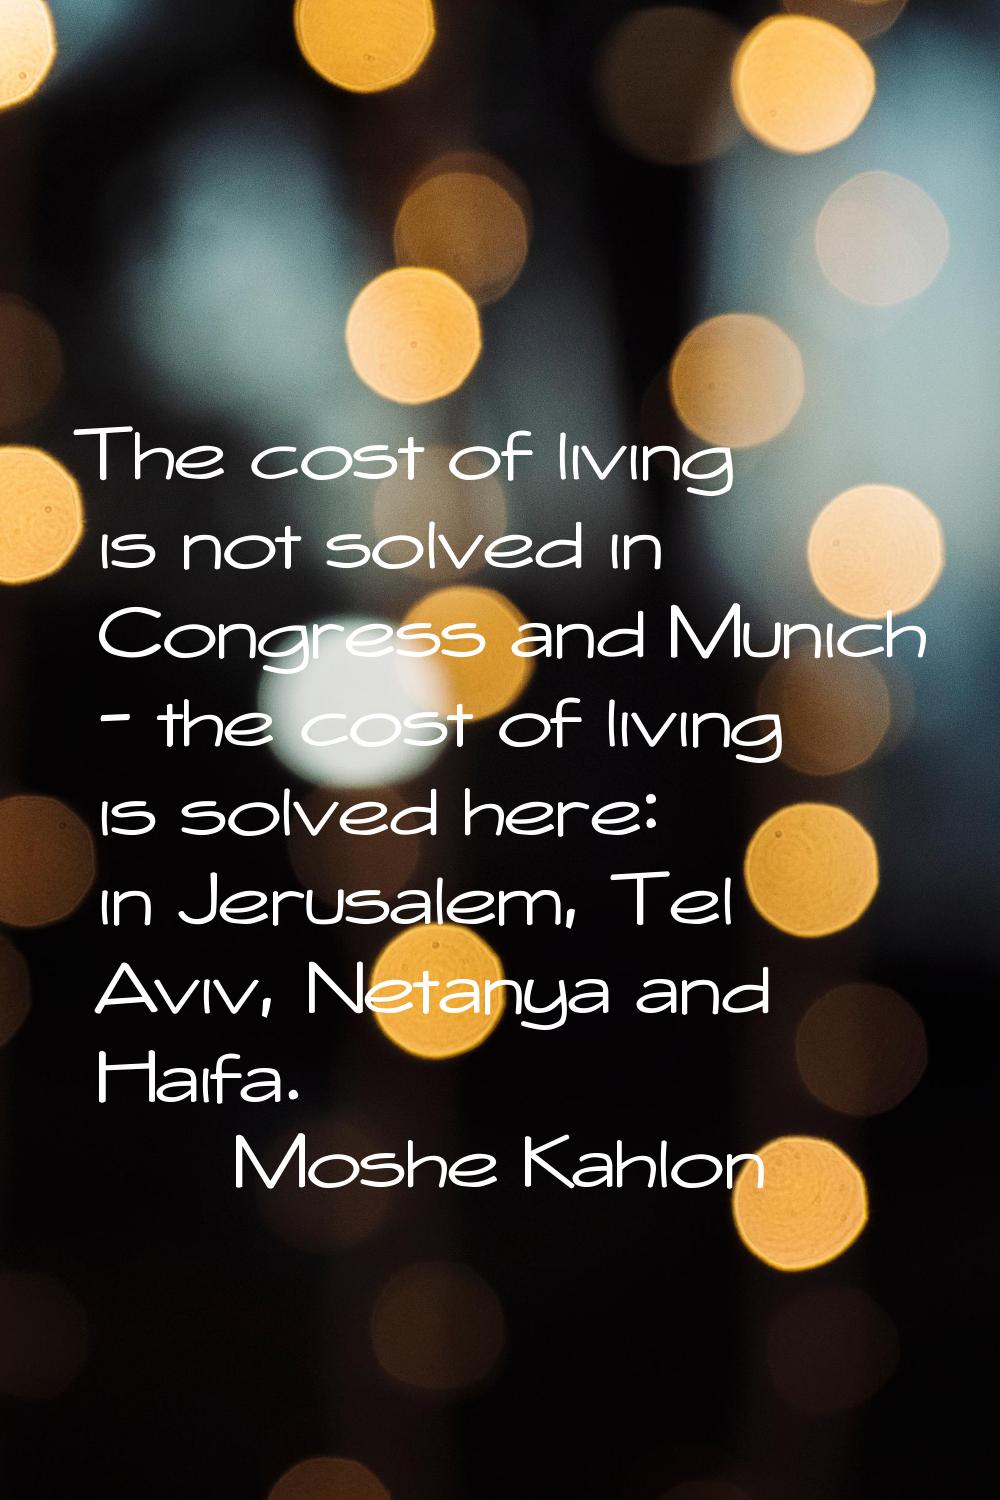 The cost of living is not solved in Congress and Munich - the cost of living is solved here: in Jer